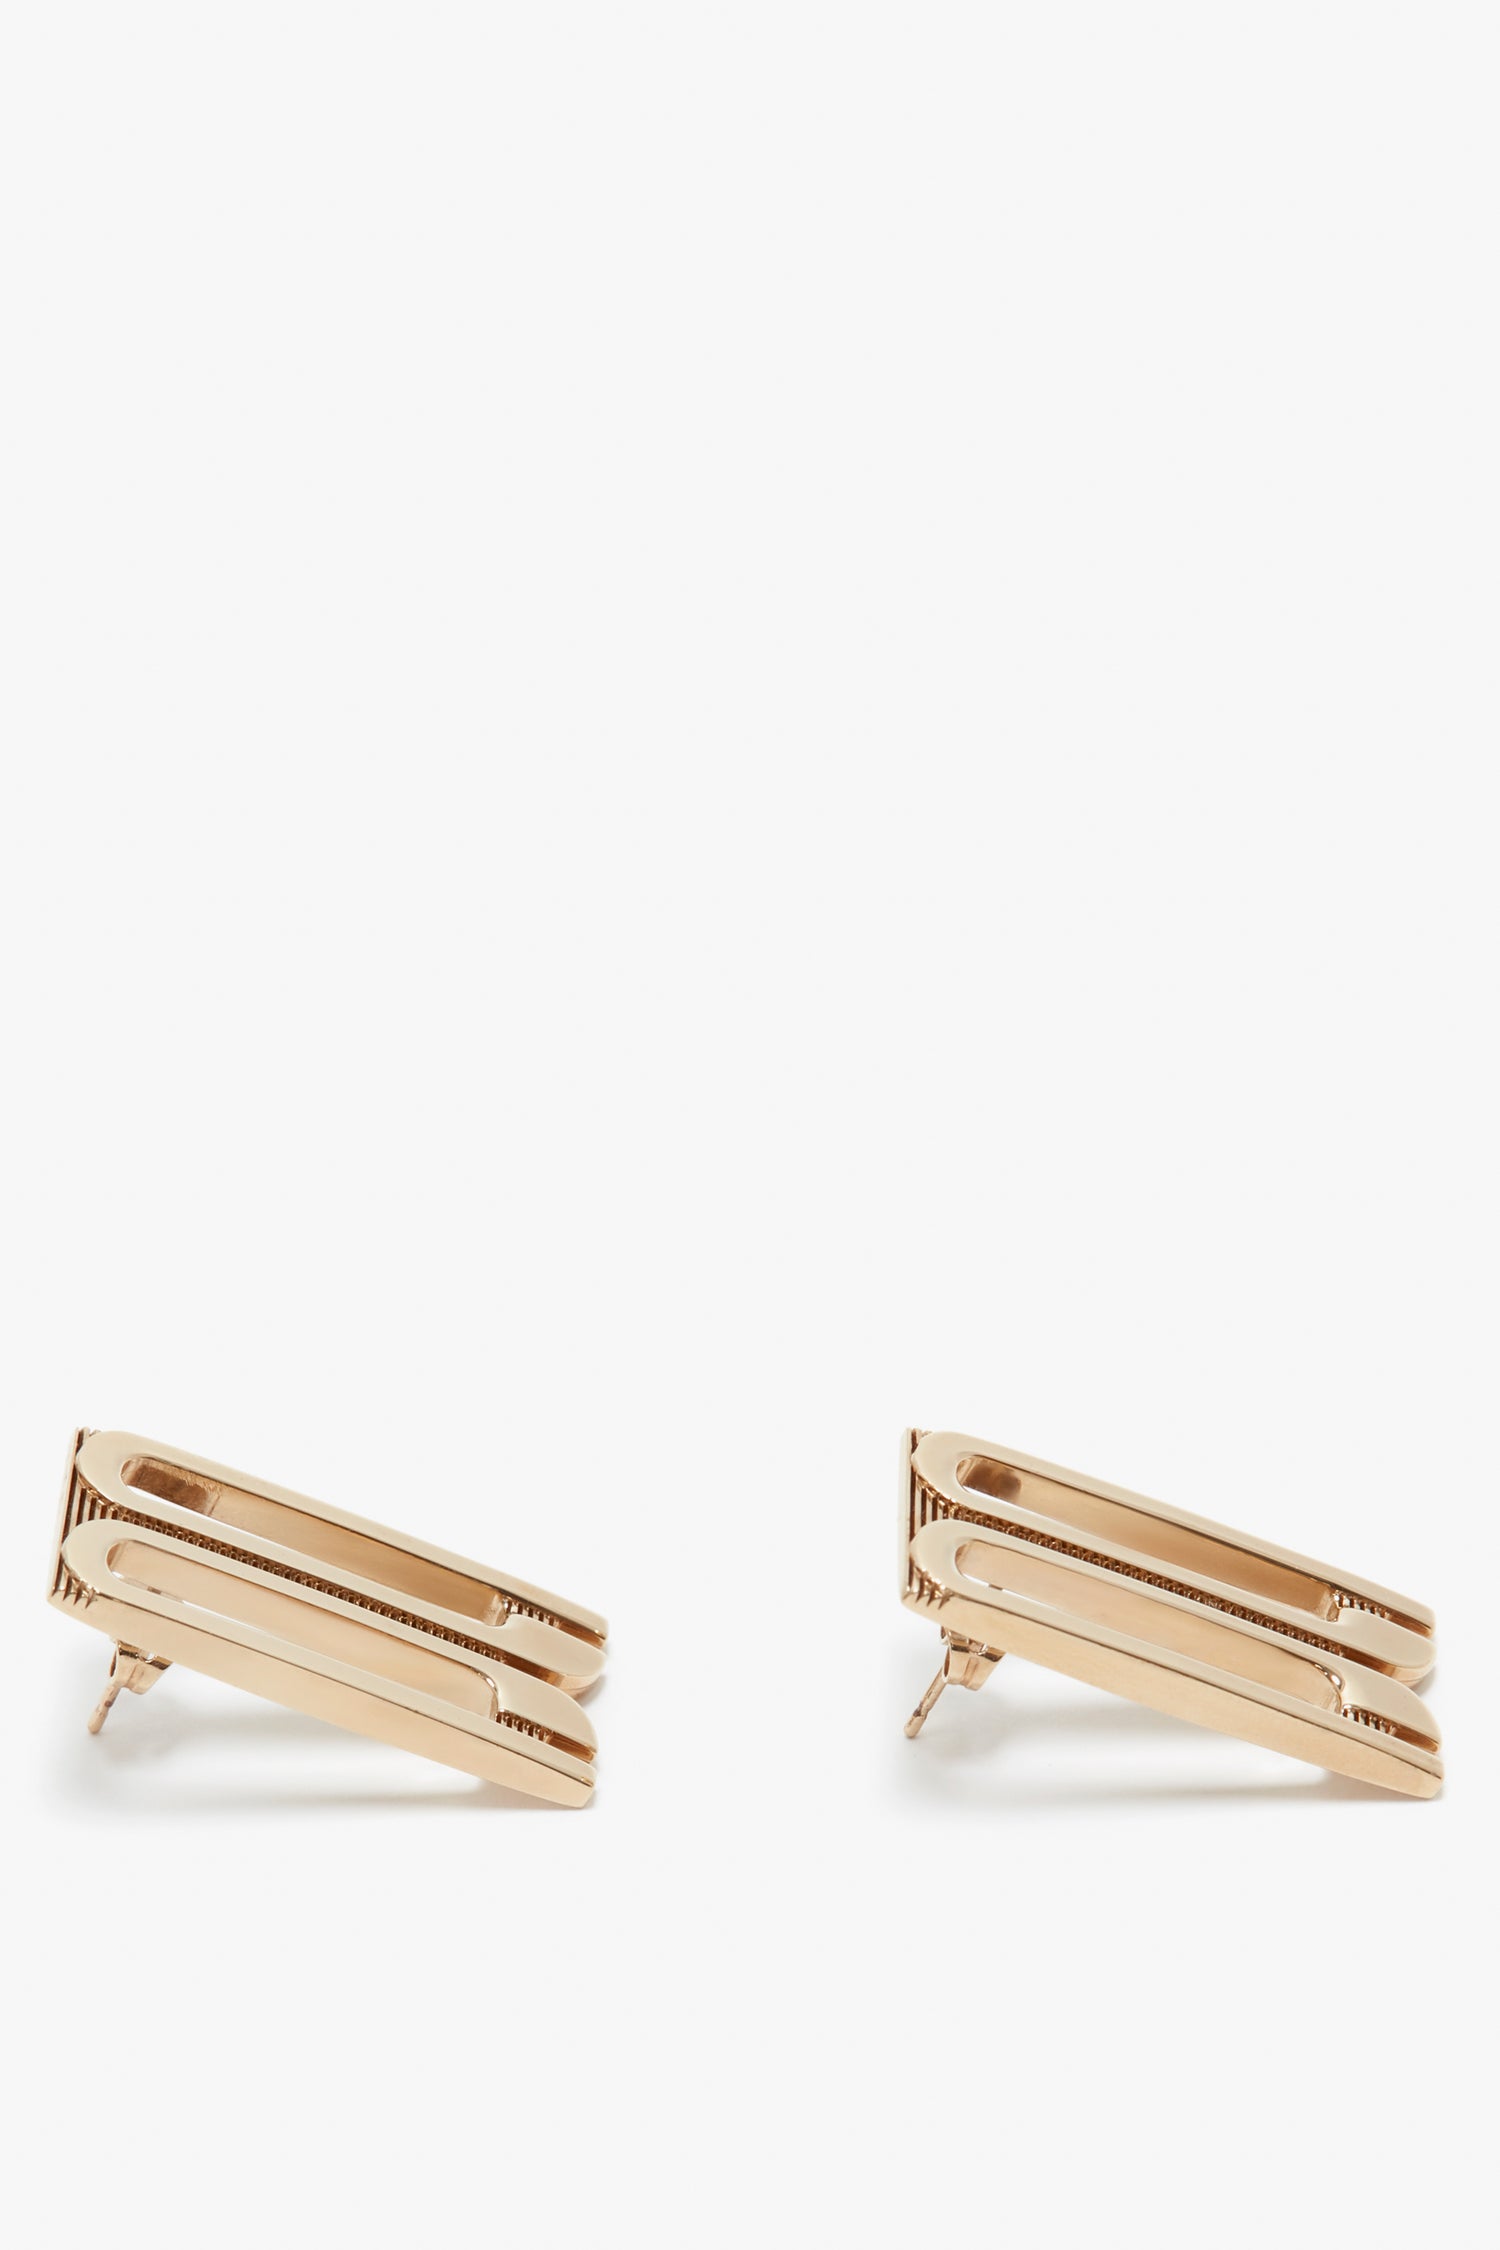 A pair of Exclusive Frame Stud Earrings In Gold by Victoria Beckham, with a minimalist design, isolated on a white background.